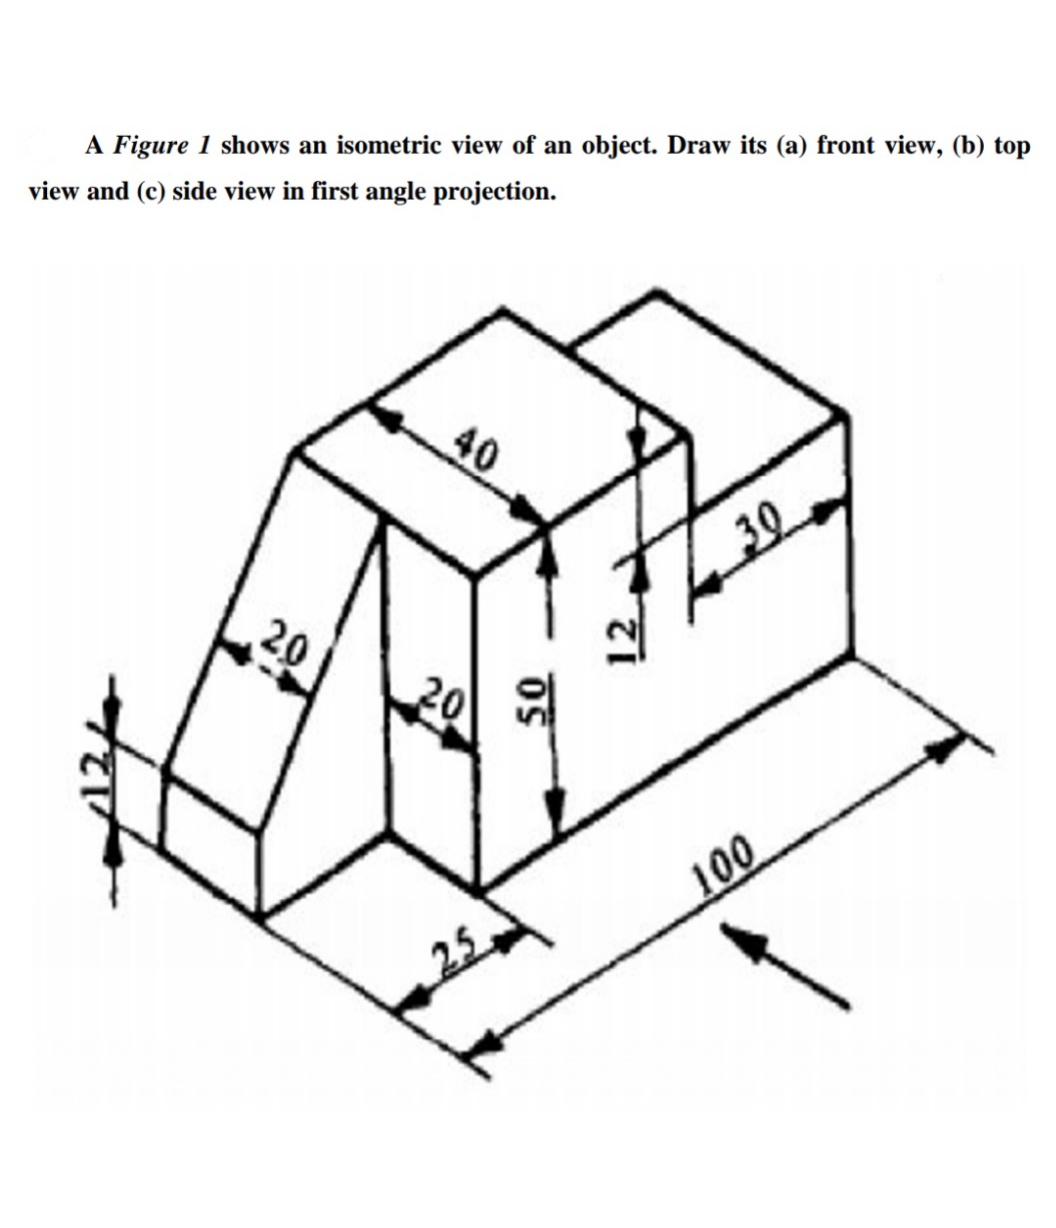 A Figure 1 shows an isometric view of an object. Draw its (a) front view, (b) top
view and (c) side view in first angle projection.
40
30
20
20
100
